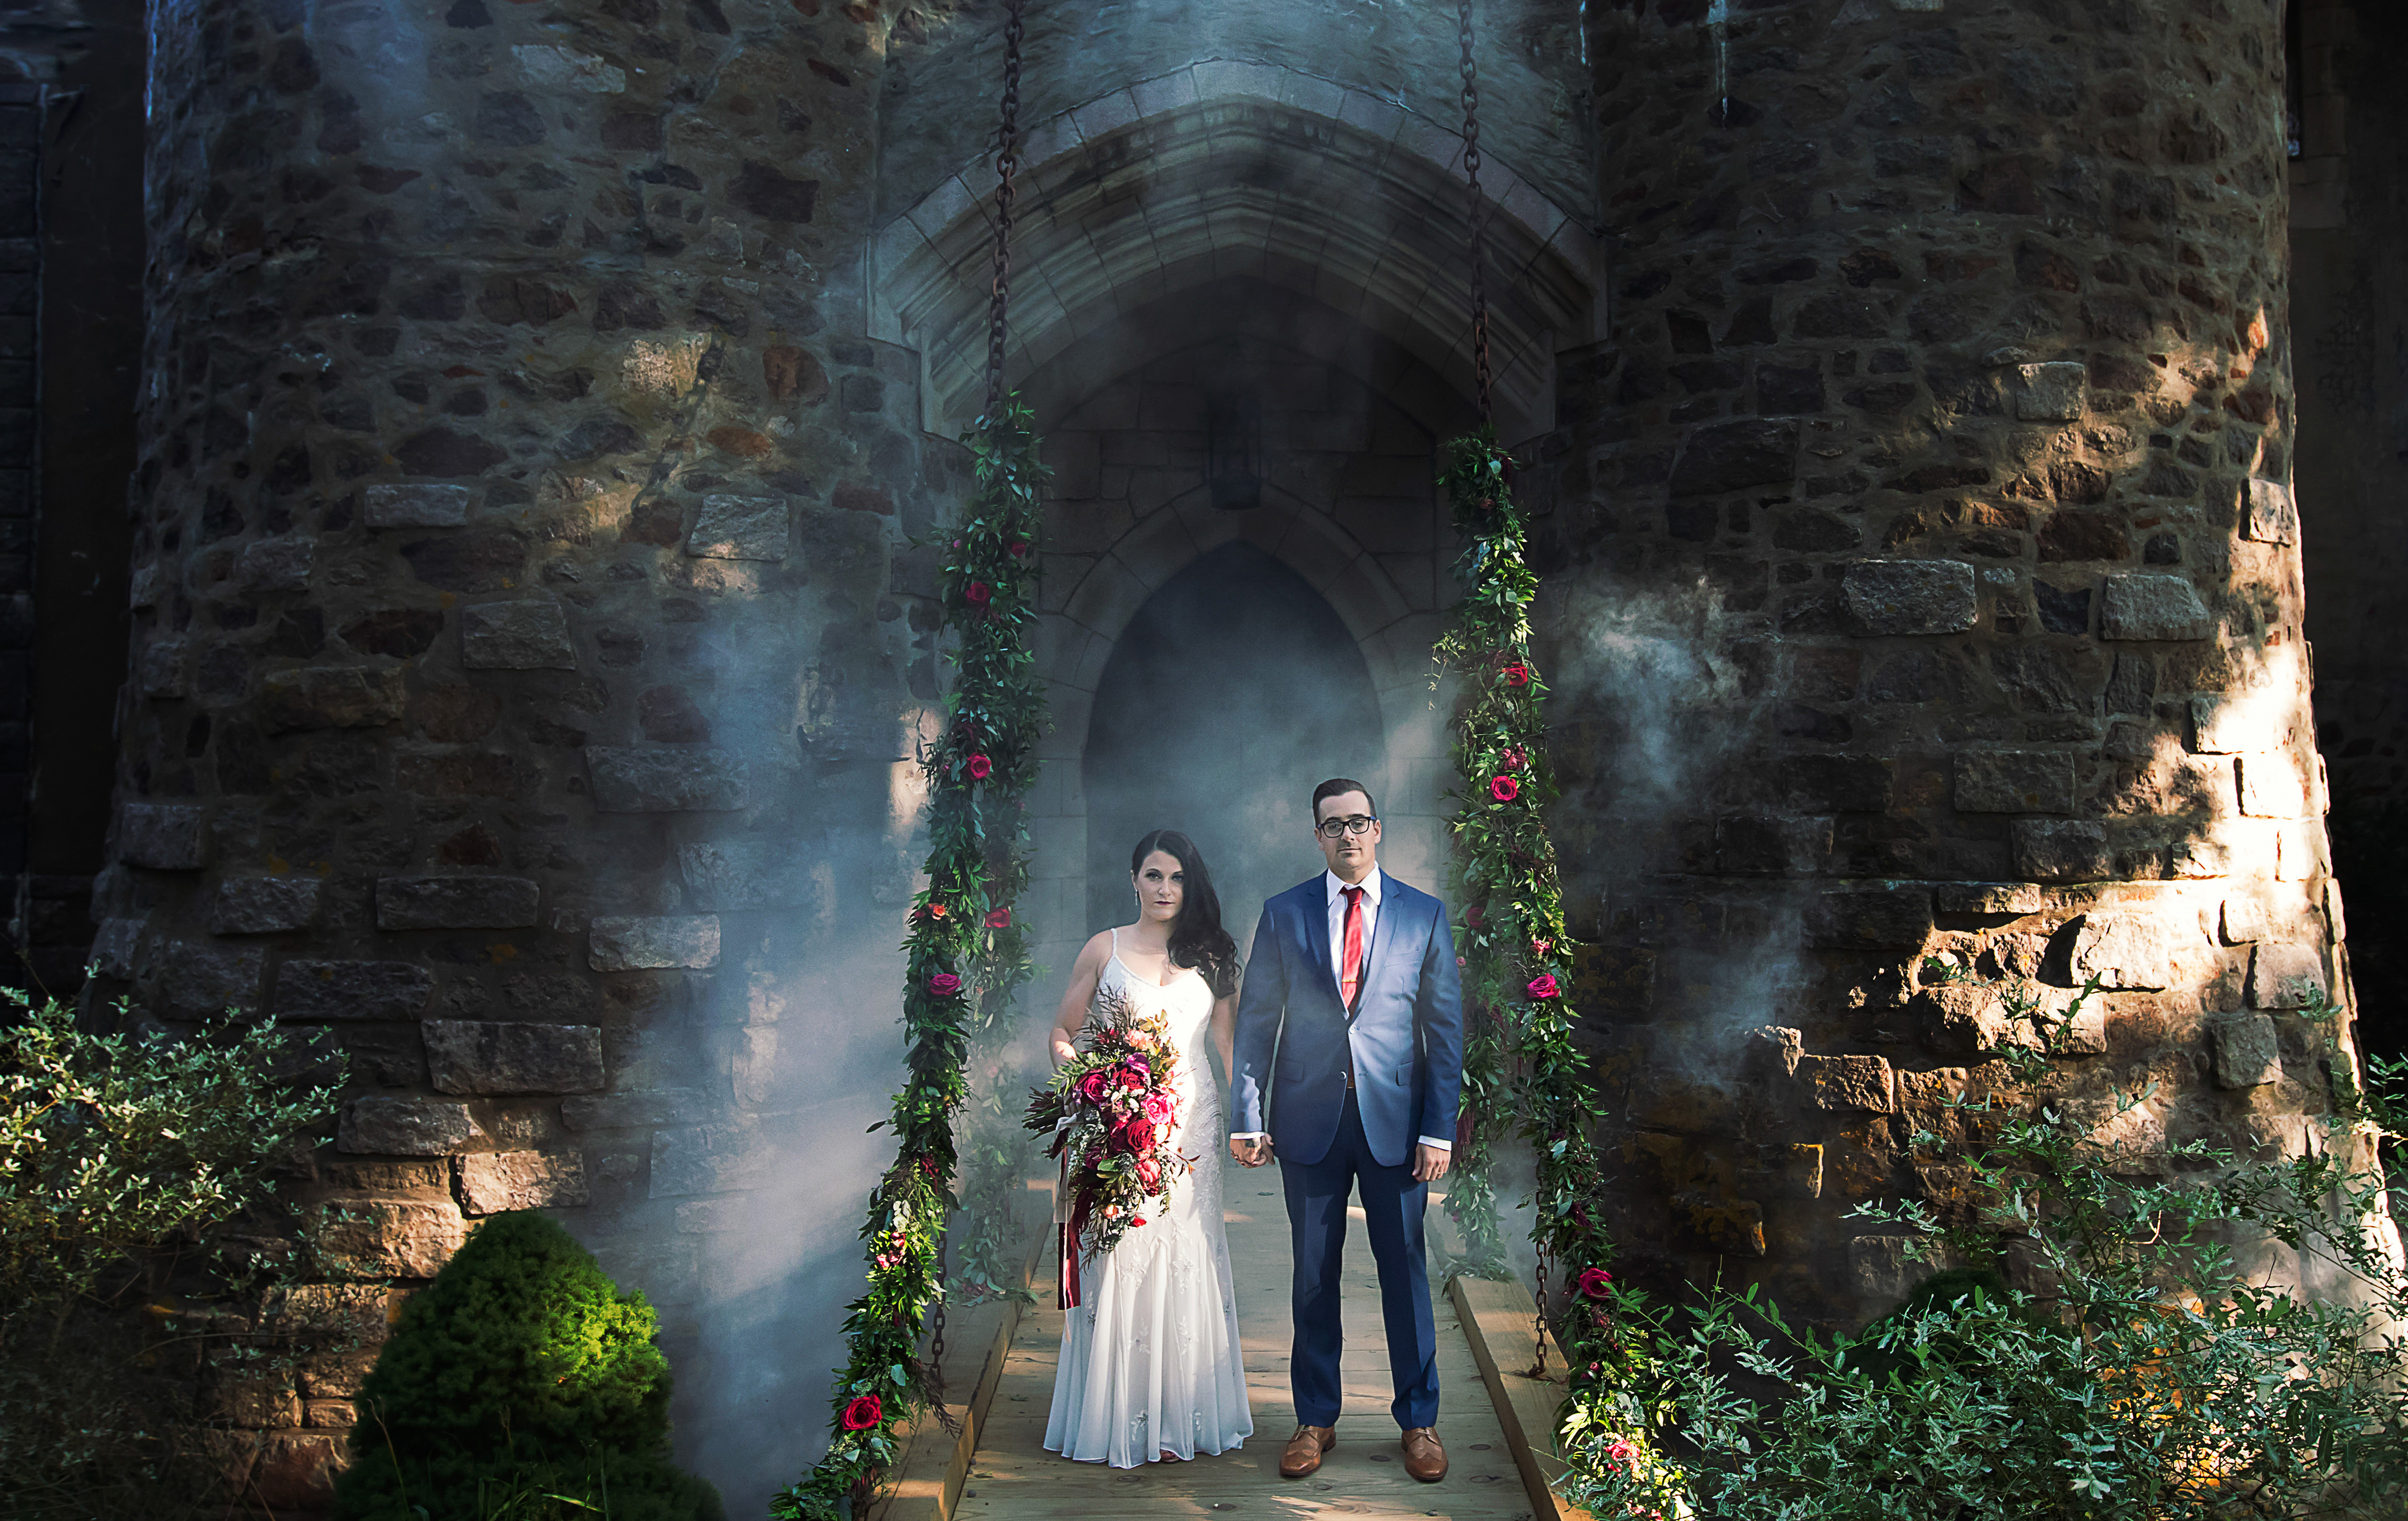 Wedding couple being photographed at Hammond Castle Museum. Bride and Groom wedding Portrait. Floral garlands adorn the drawbridge chains.